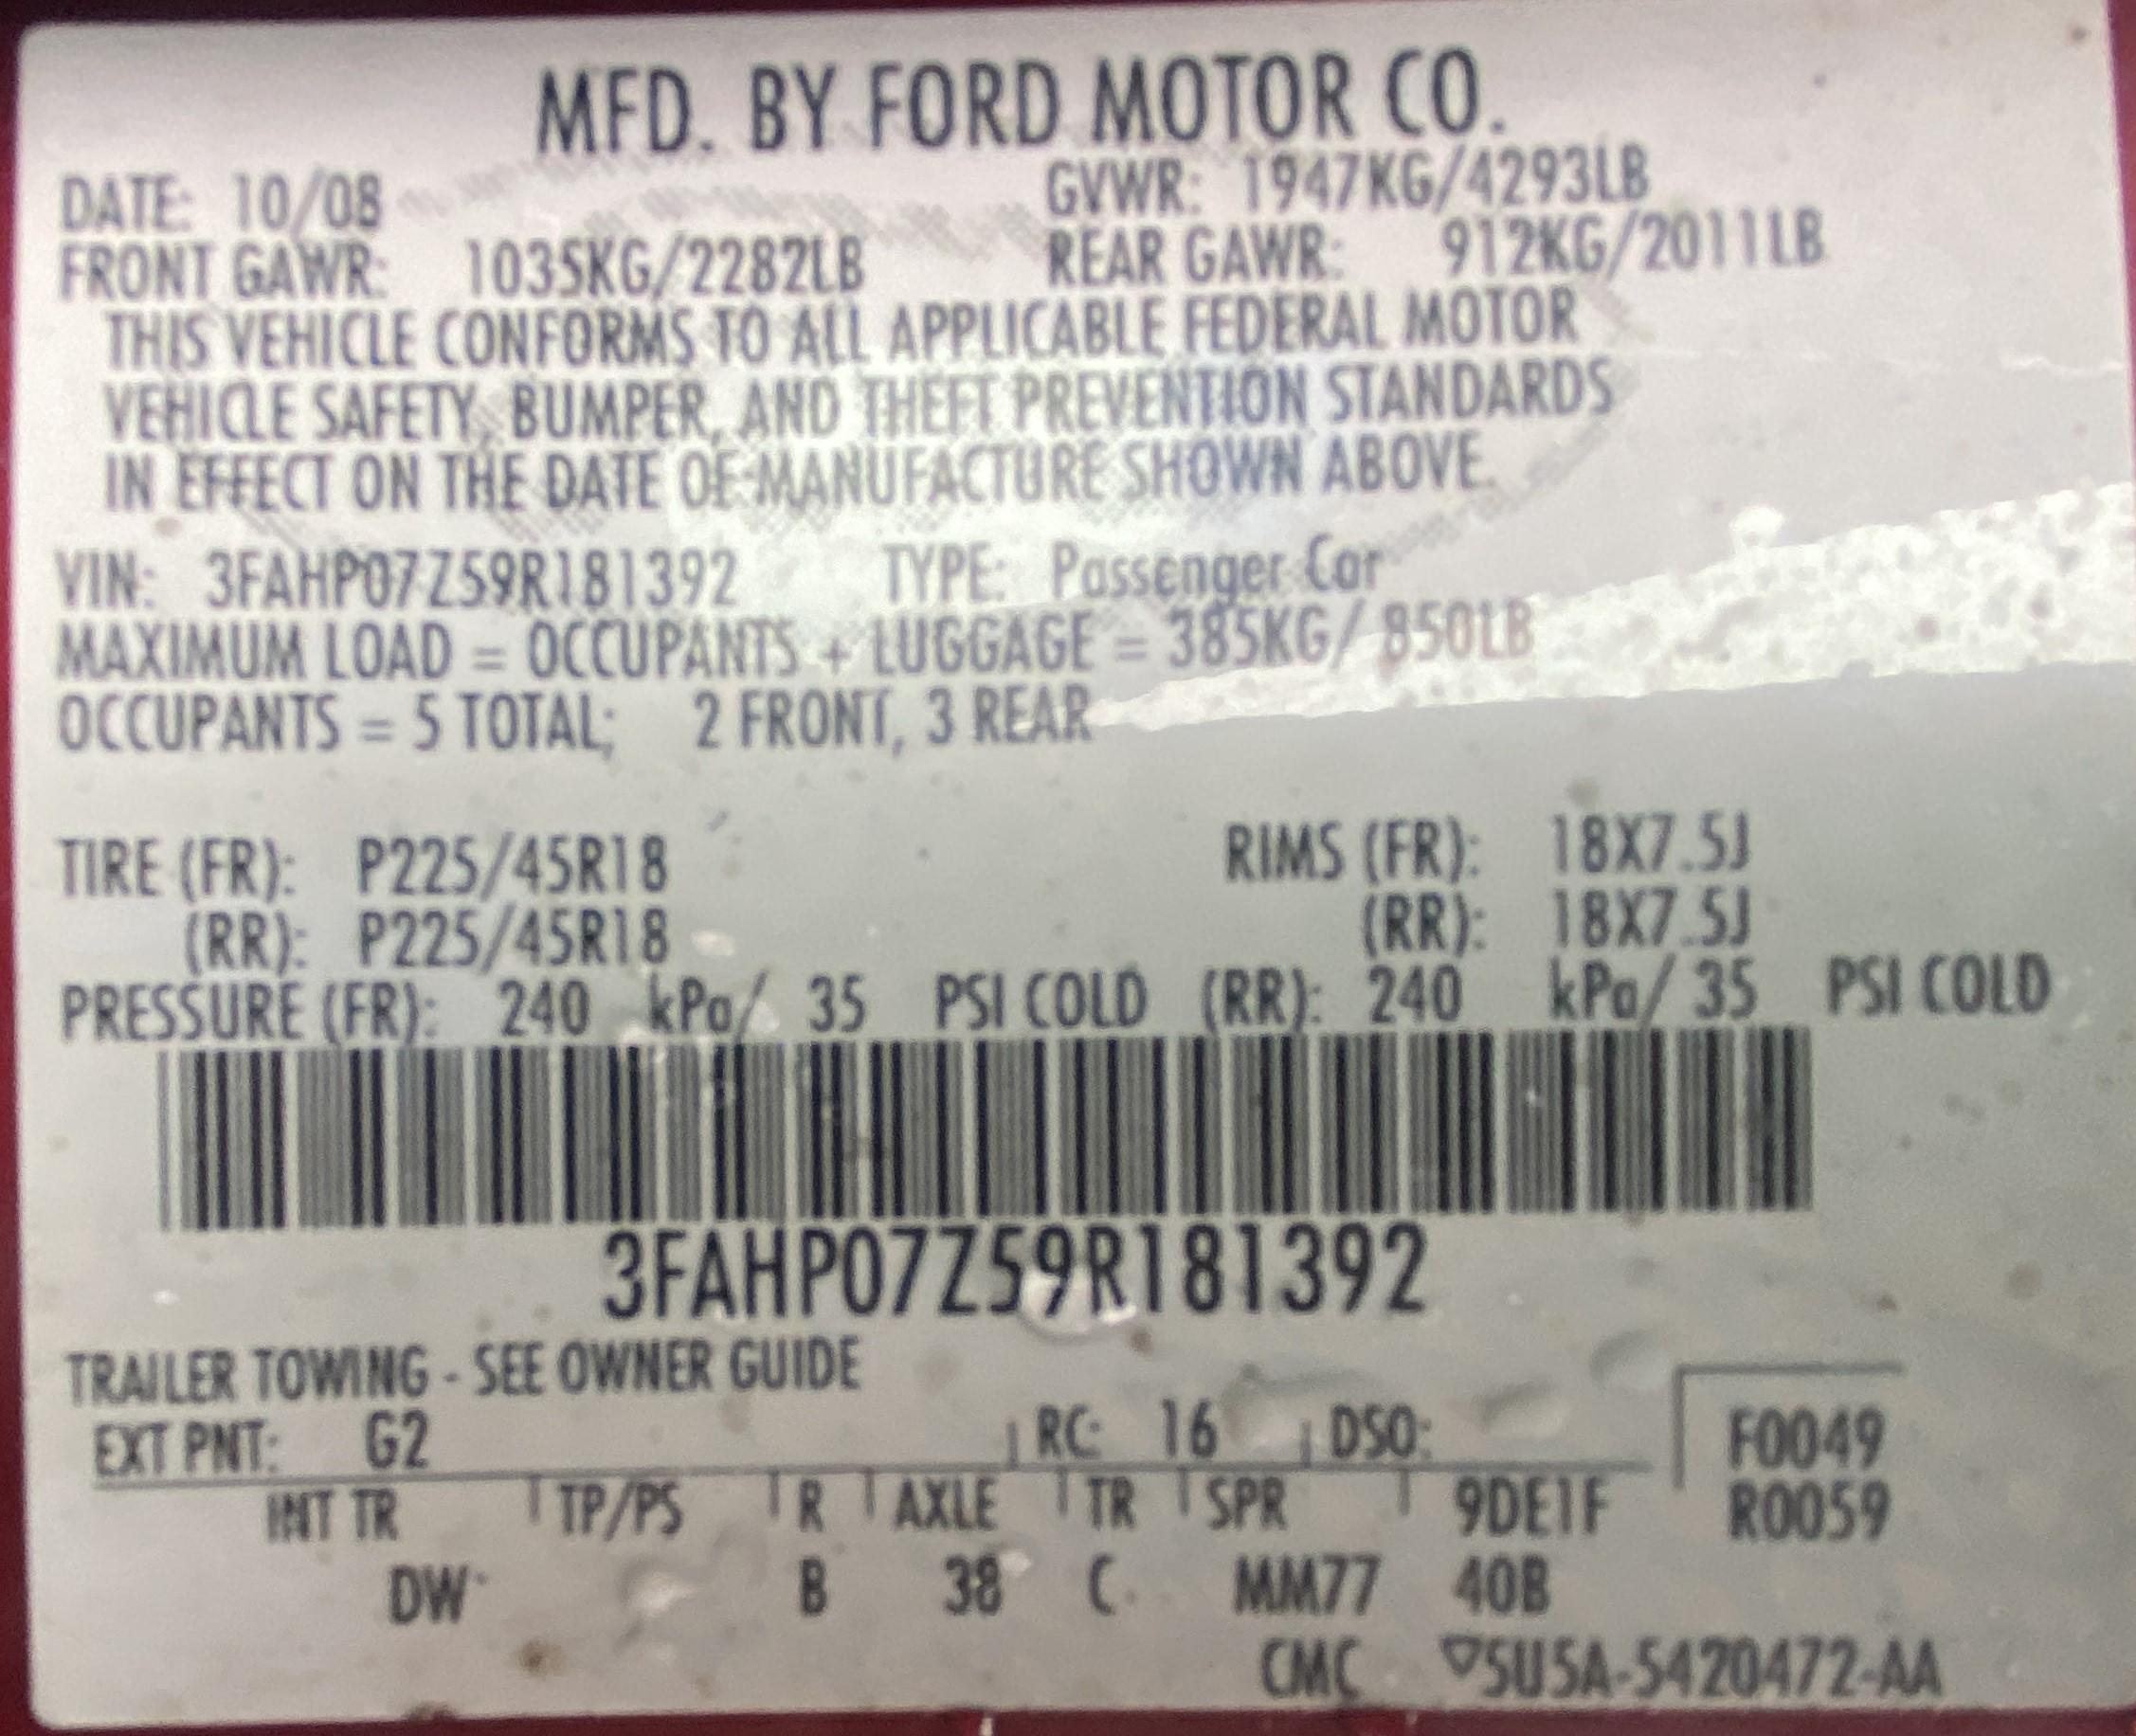 2008 Ford Fusion - 154K Miles